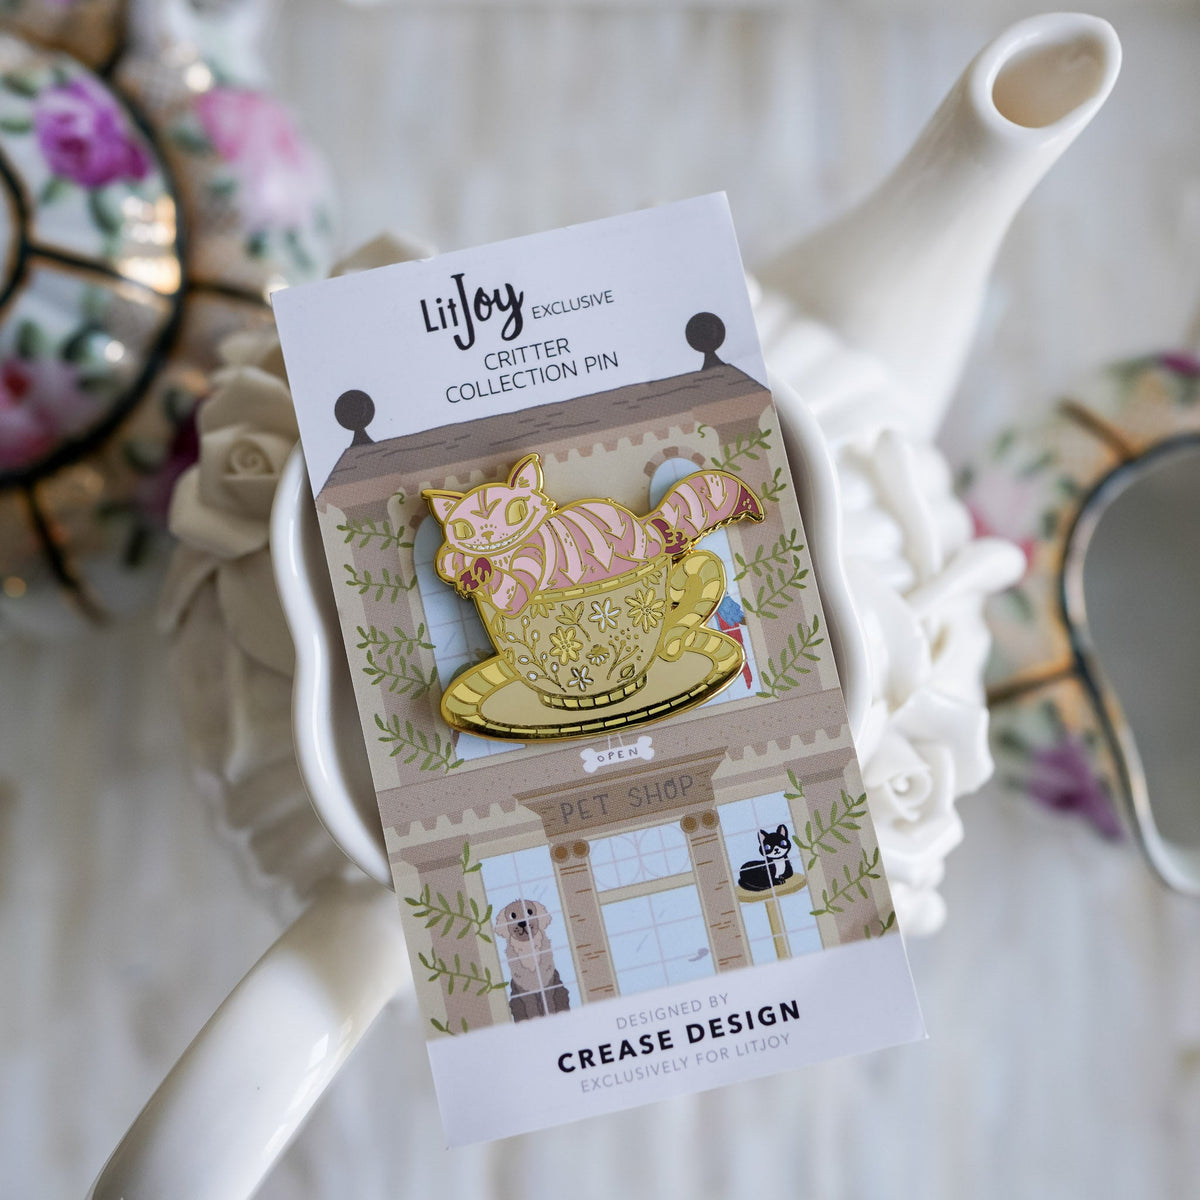 Chesire Cat Critter Collection Enamel Pin with a pink, striped, smiling cat sitting in a teacup on top of a saucer.